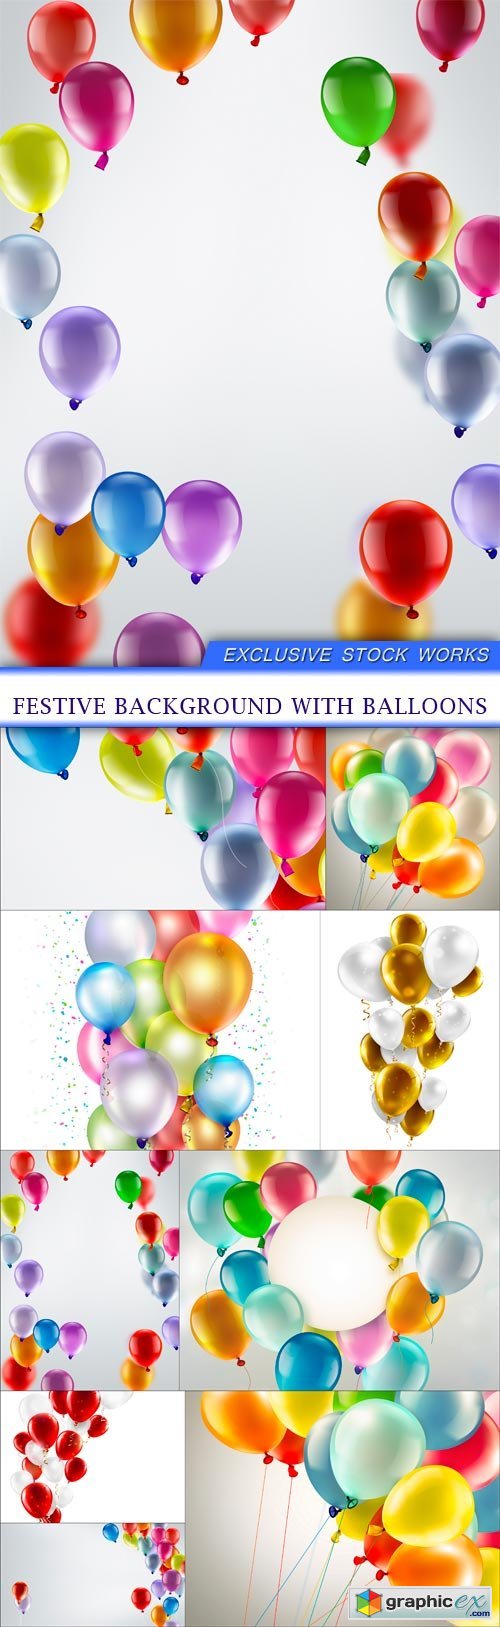 festive background with balloons 9x JPEG